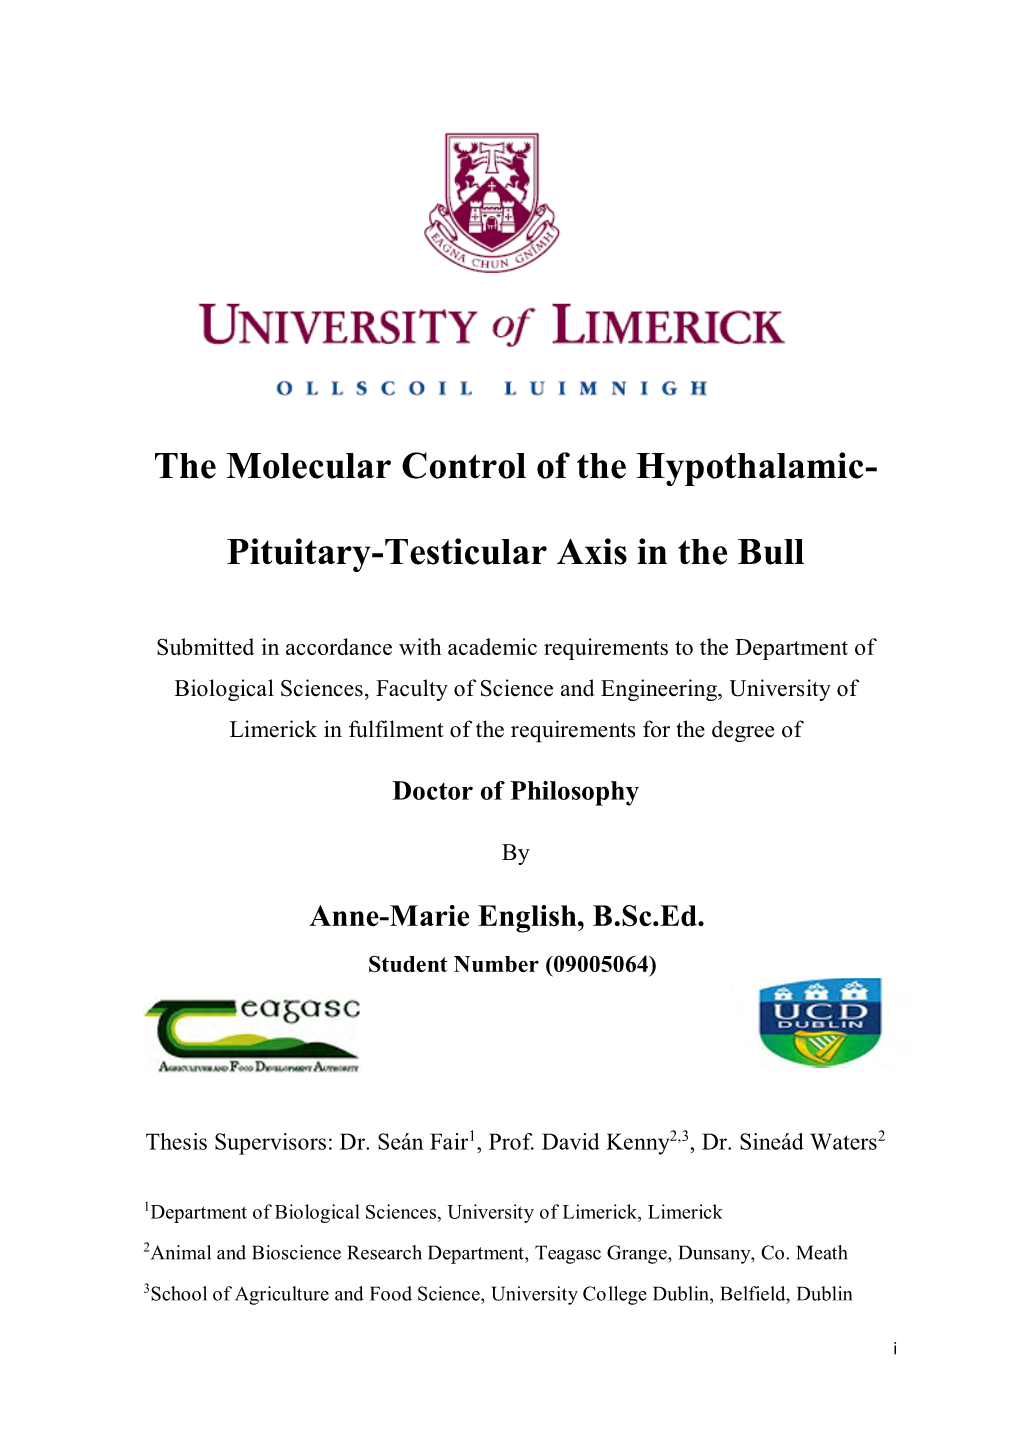 The Molecular Control of the Hypothalamic- Pituitary-Testicular Axis in the Bull